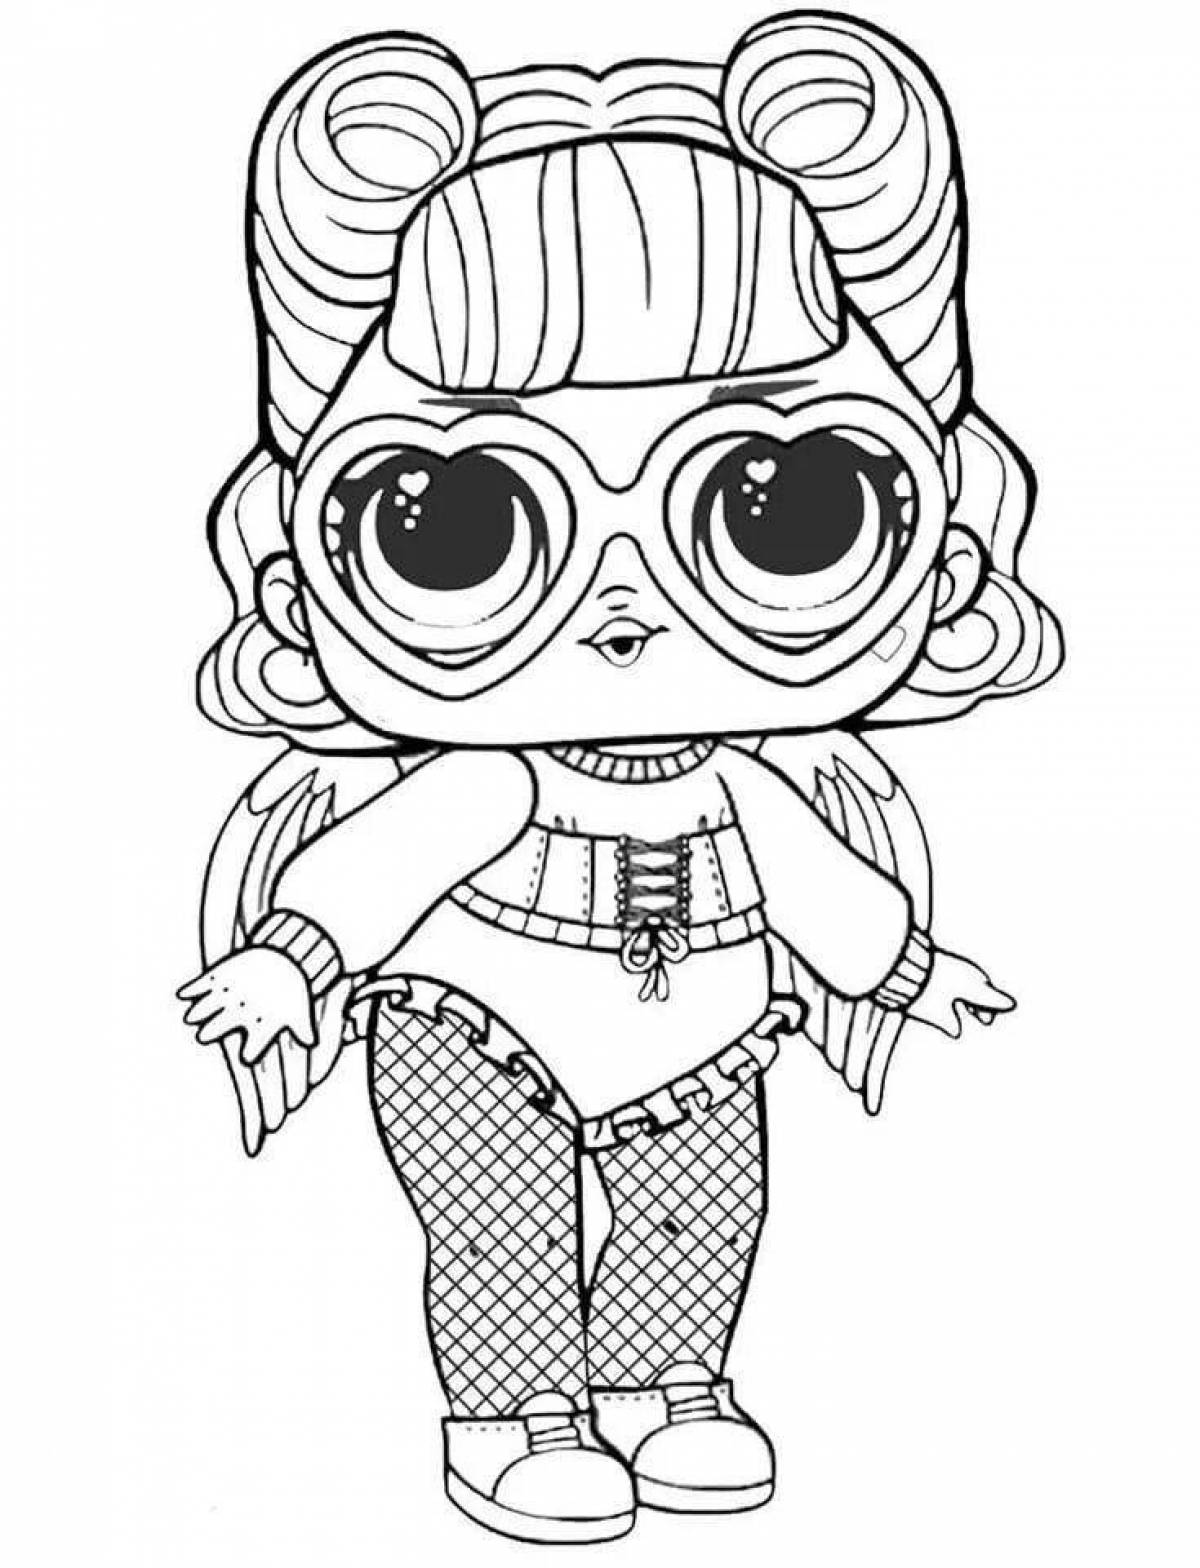 Glitter print lol doll coloring page